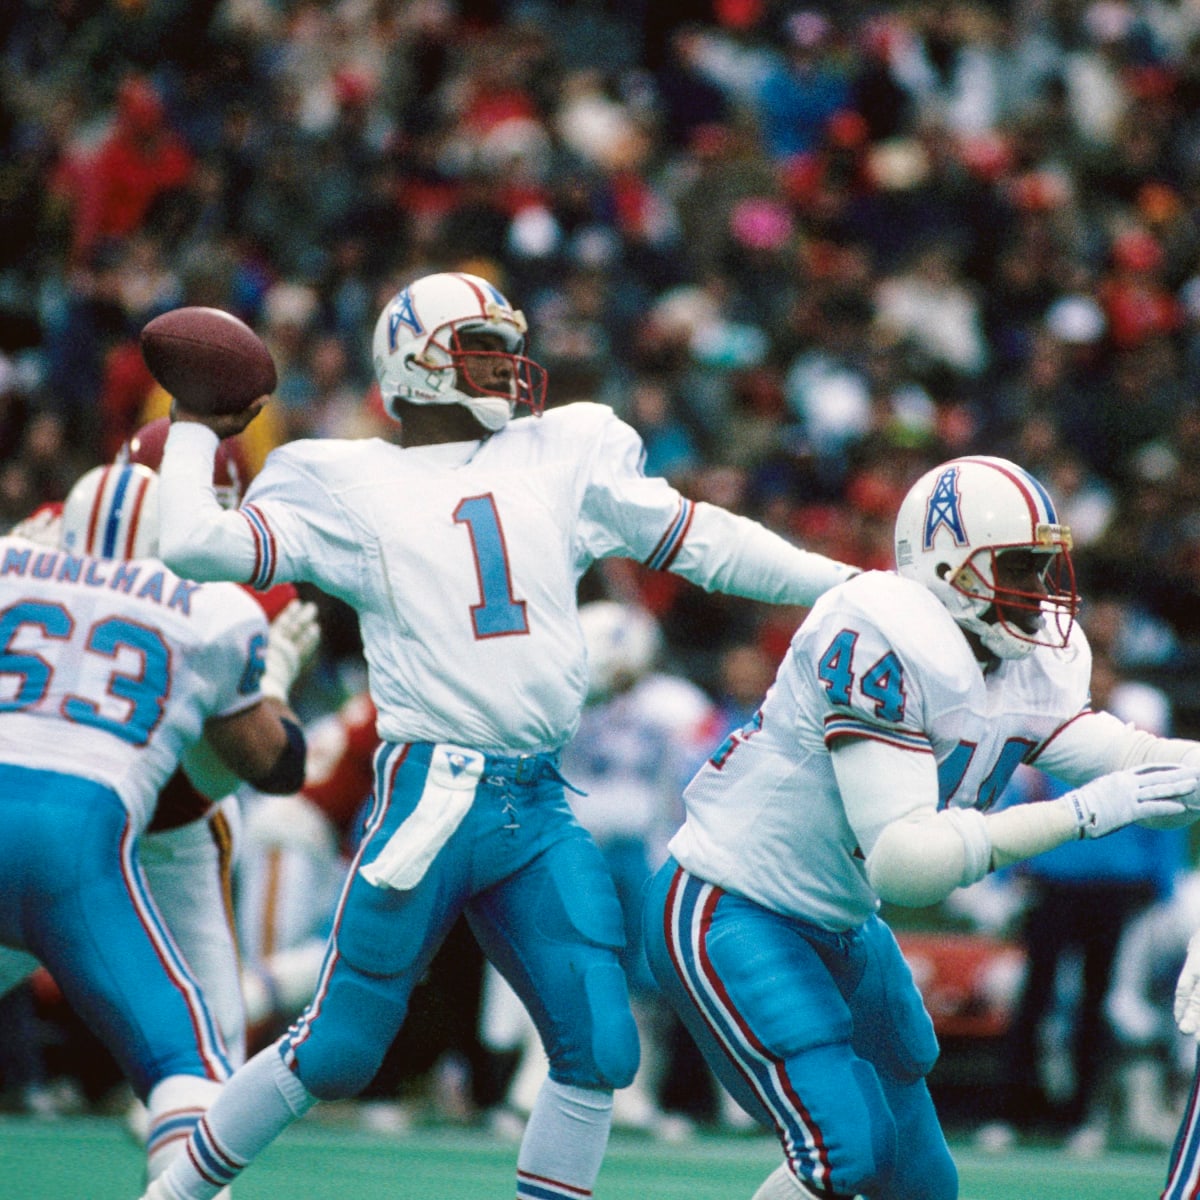 Titans not letting Texans wear Oilers throwback uniforms - NBC Sports